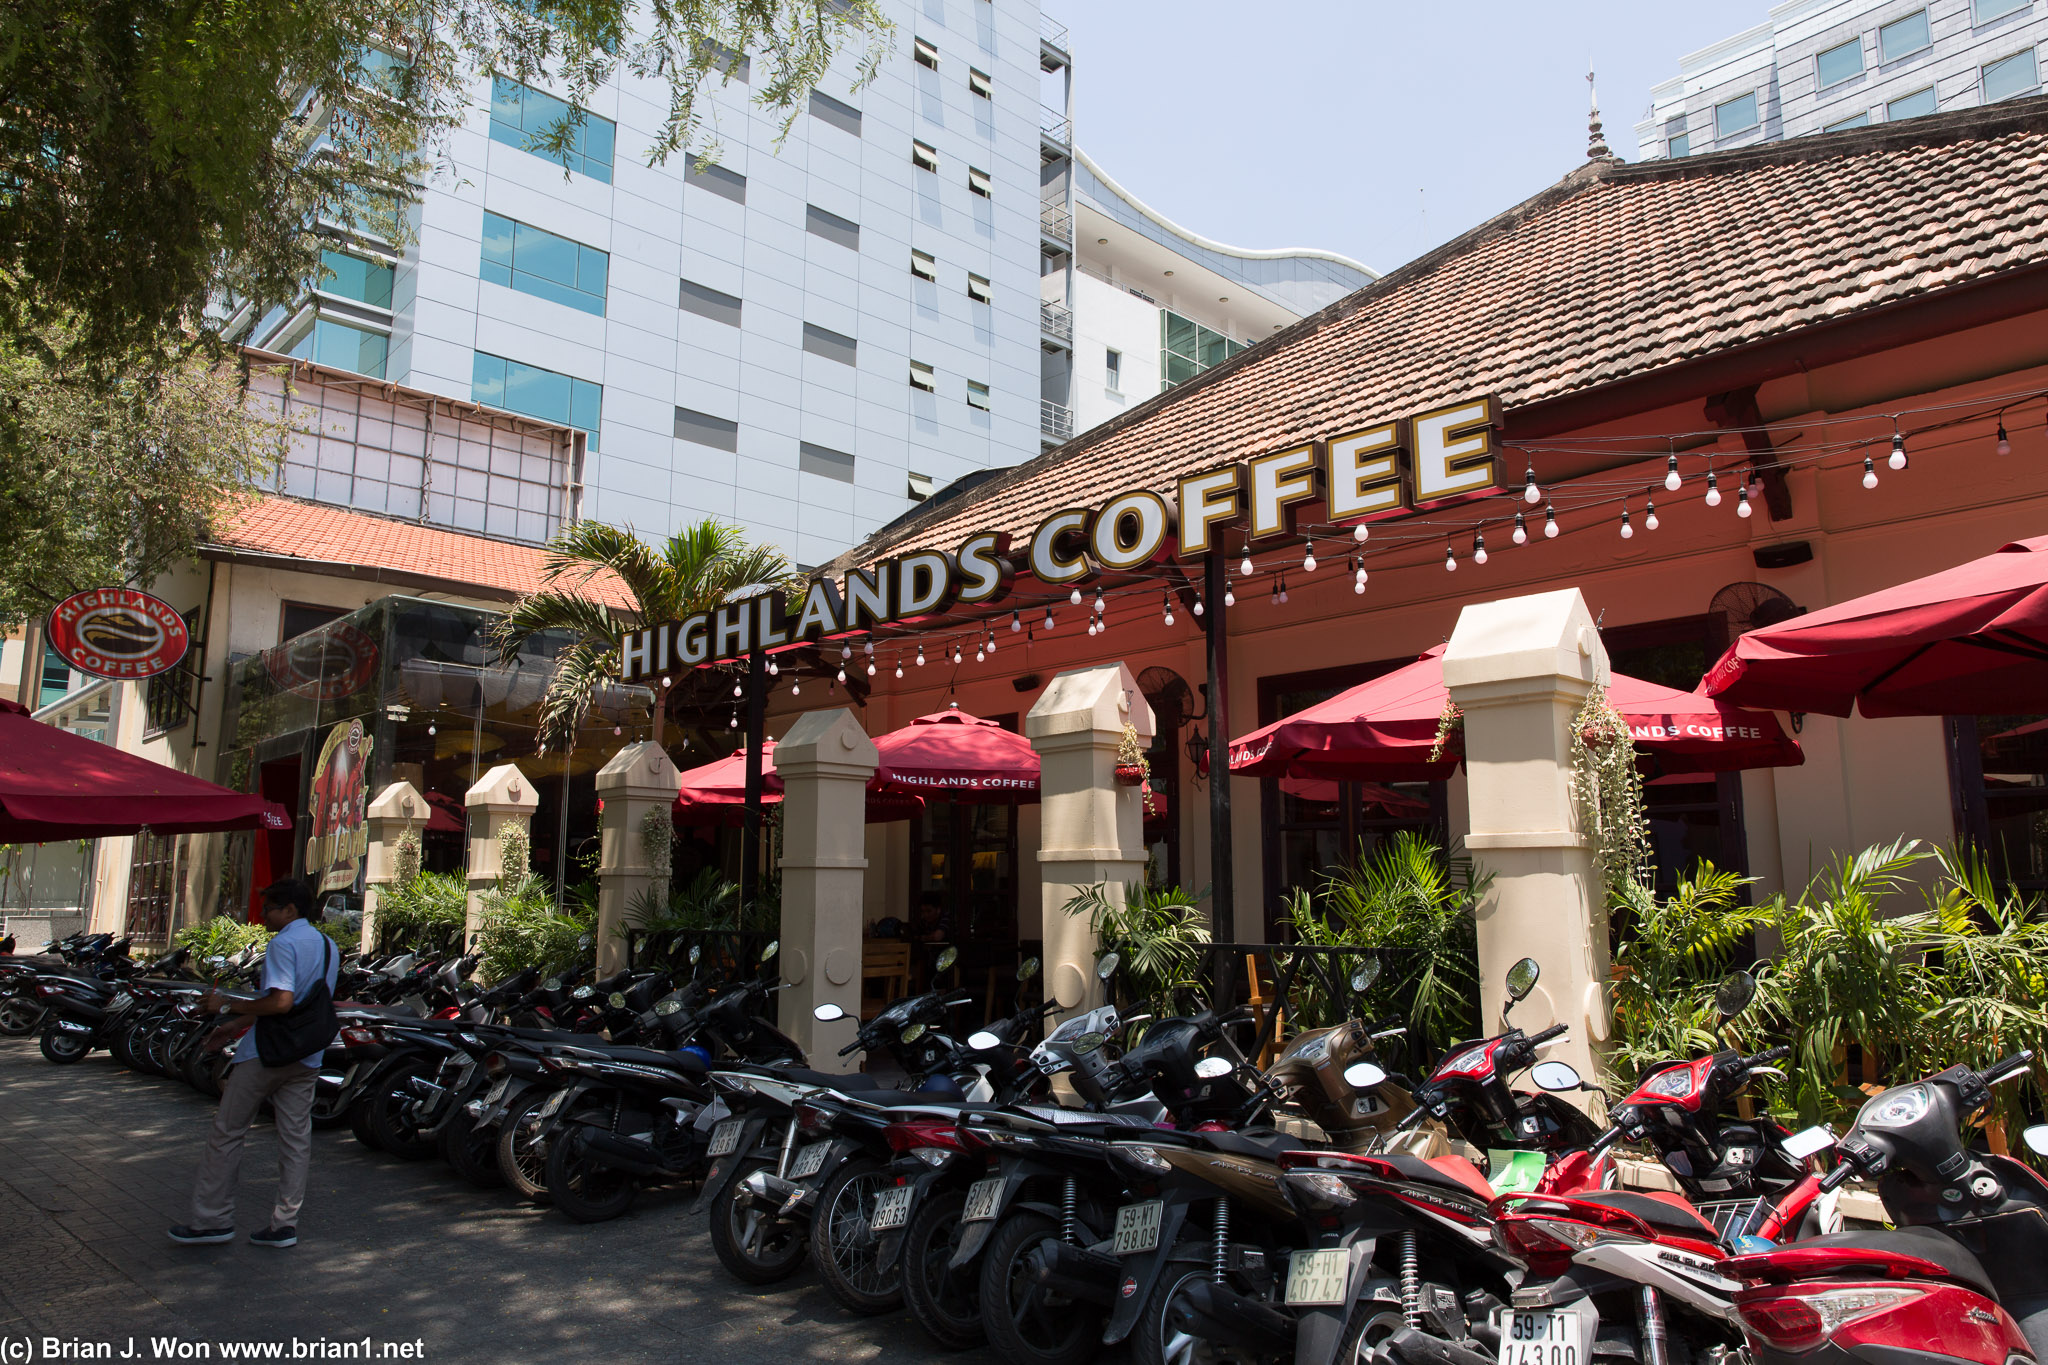 Highlands Coffee is a big chain here. Don't, worry, there's also Starbucks and Coffee Bean.